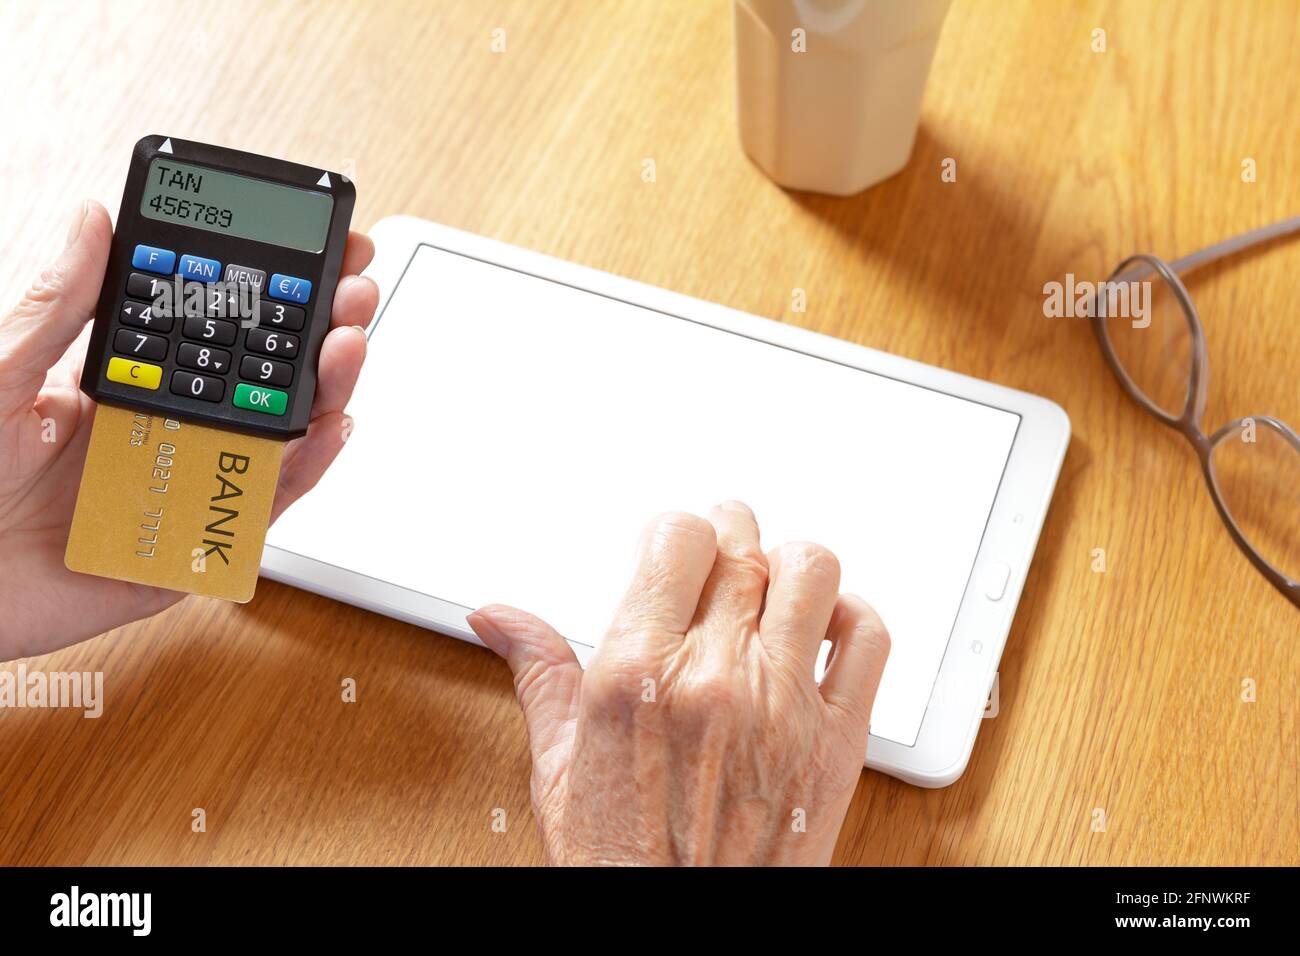 Hands of senior woman with a tablet pc and a confirmation code generator to log into the bank account, blank screen, mockup. Stock Photo